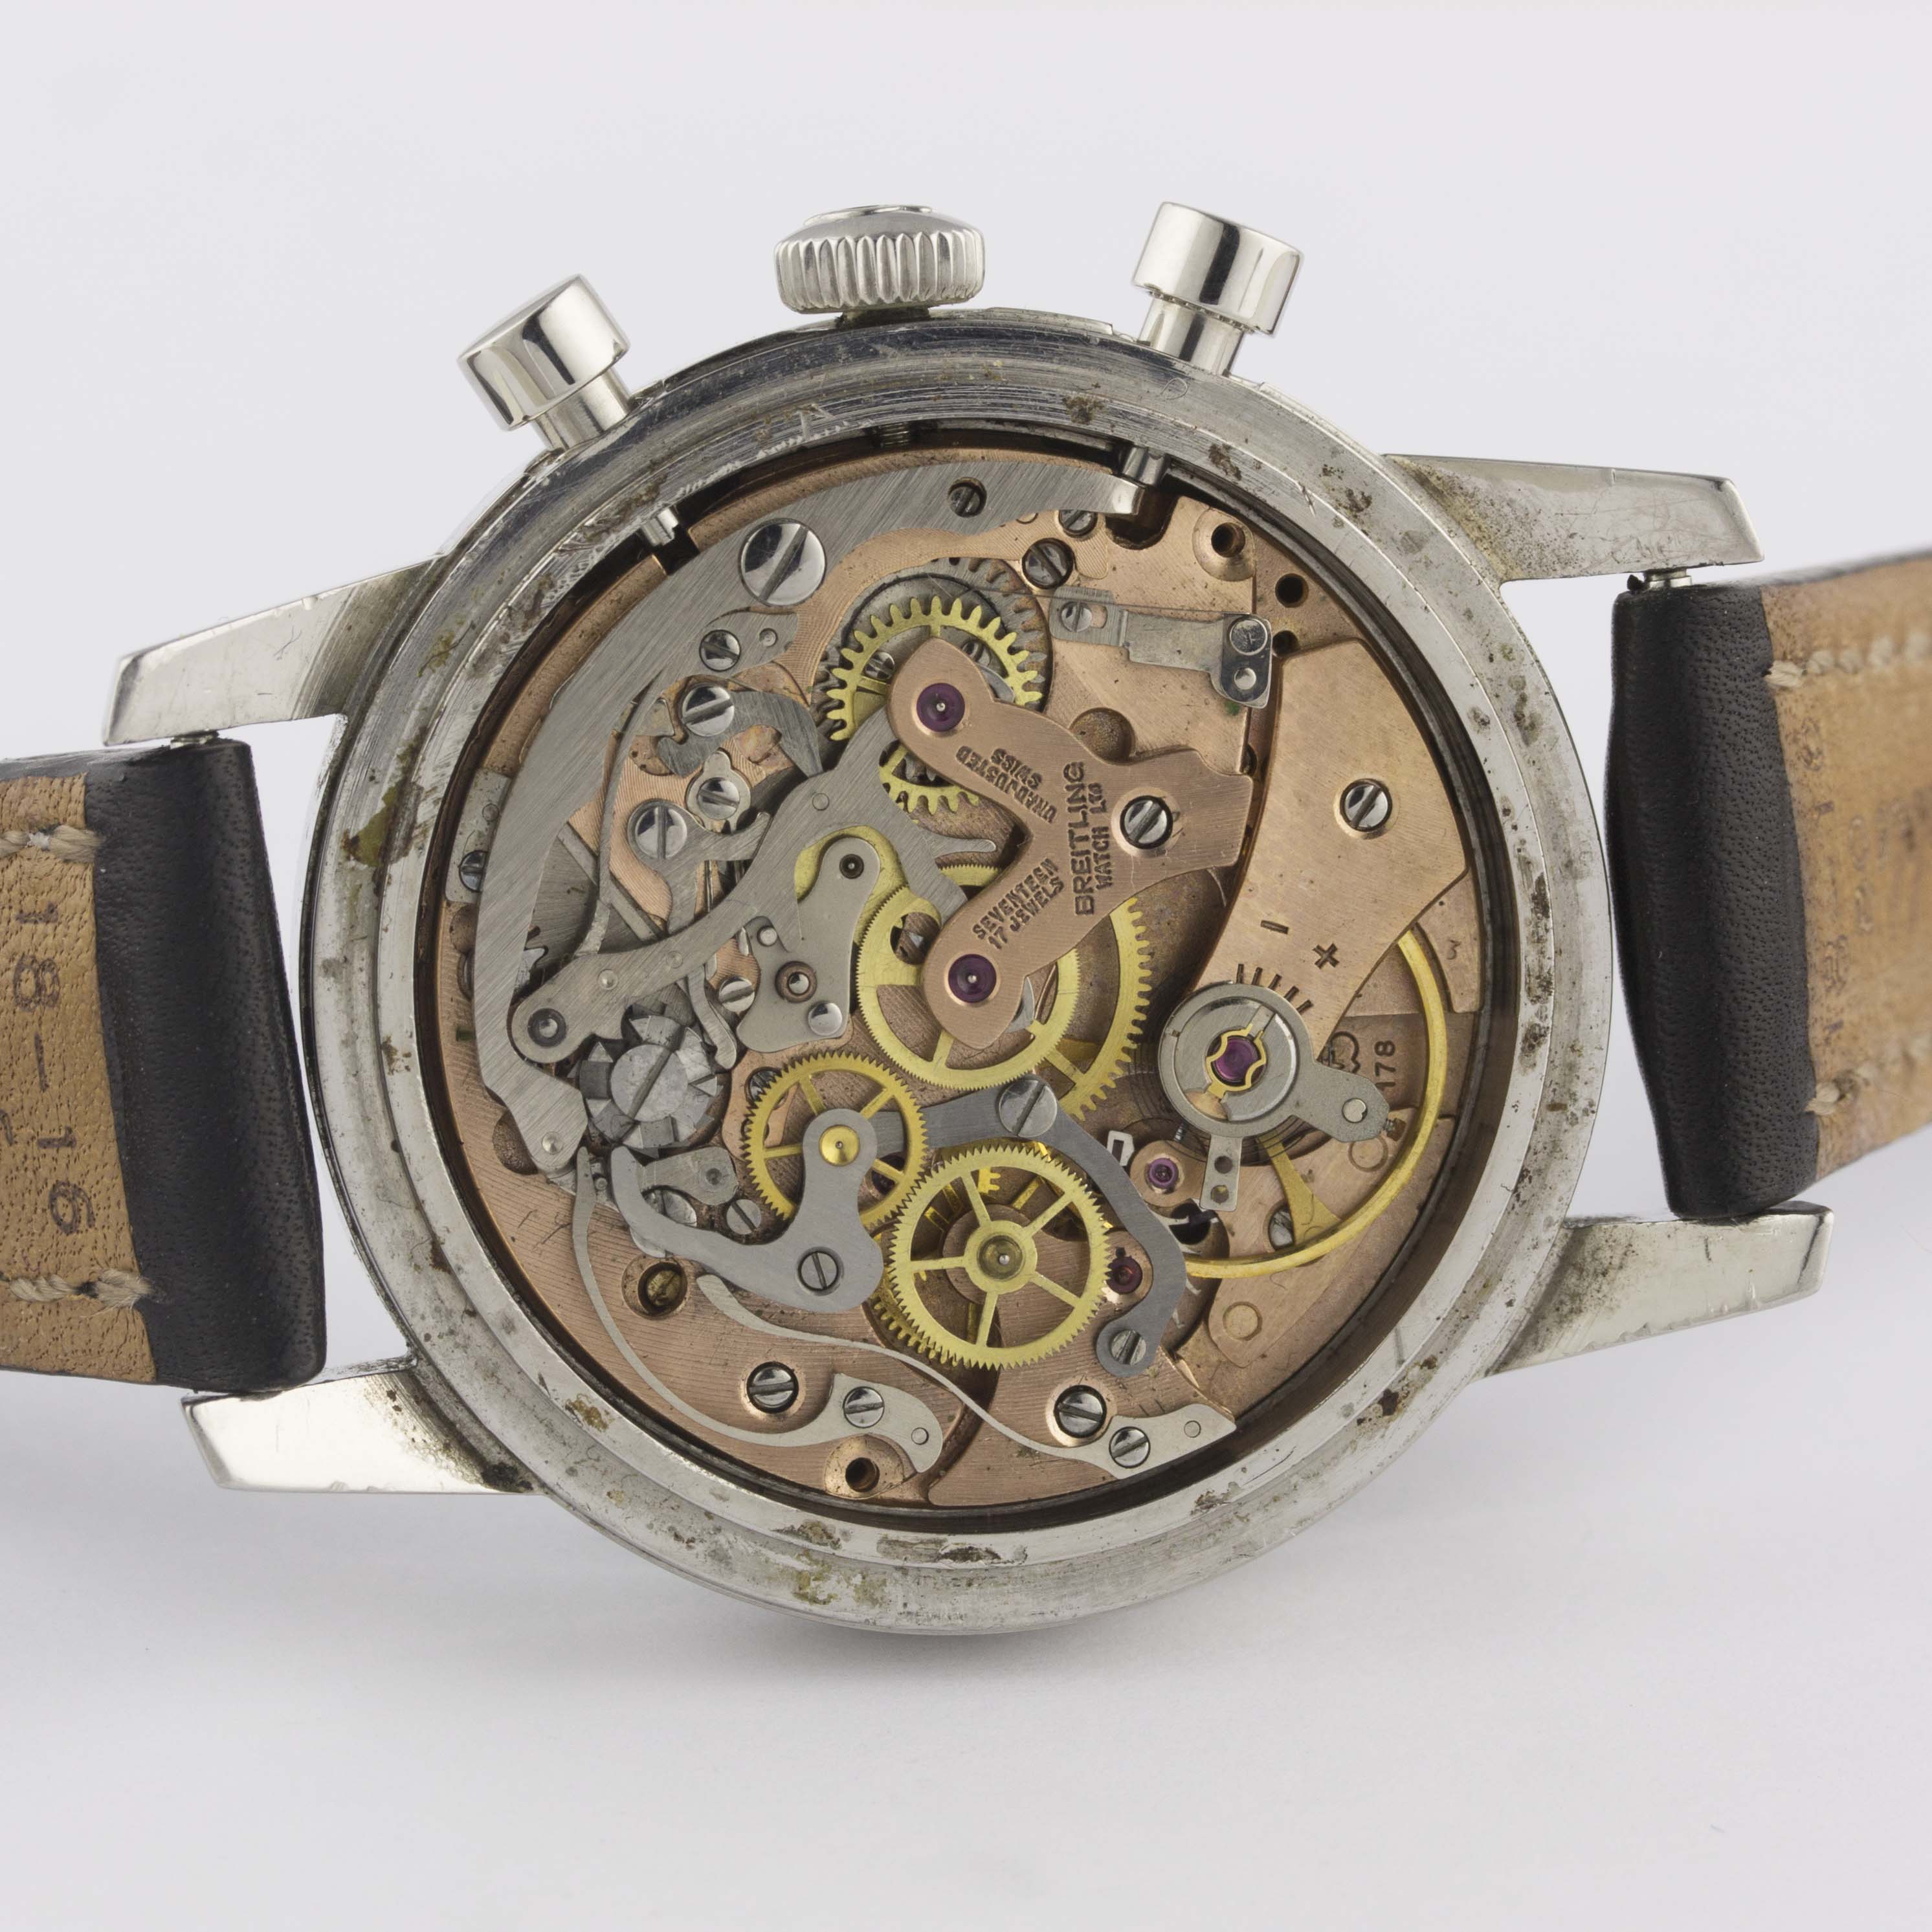 A RARE GENTLEMAN'S STAINLESS STEEL BREITLING TOP TIME 24 HOUR CHRONOGRAPH WRIST WATCH CIRCA 1968, - Image 9 of 12